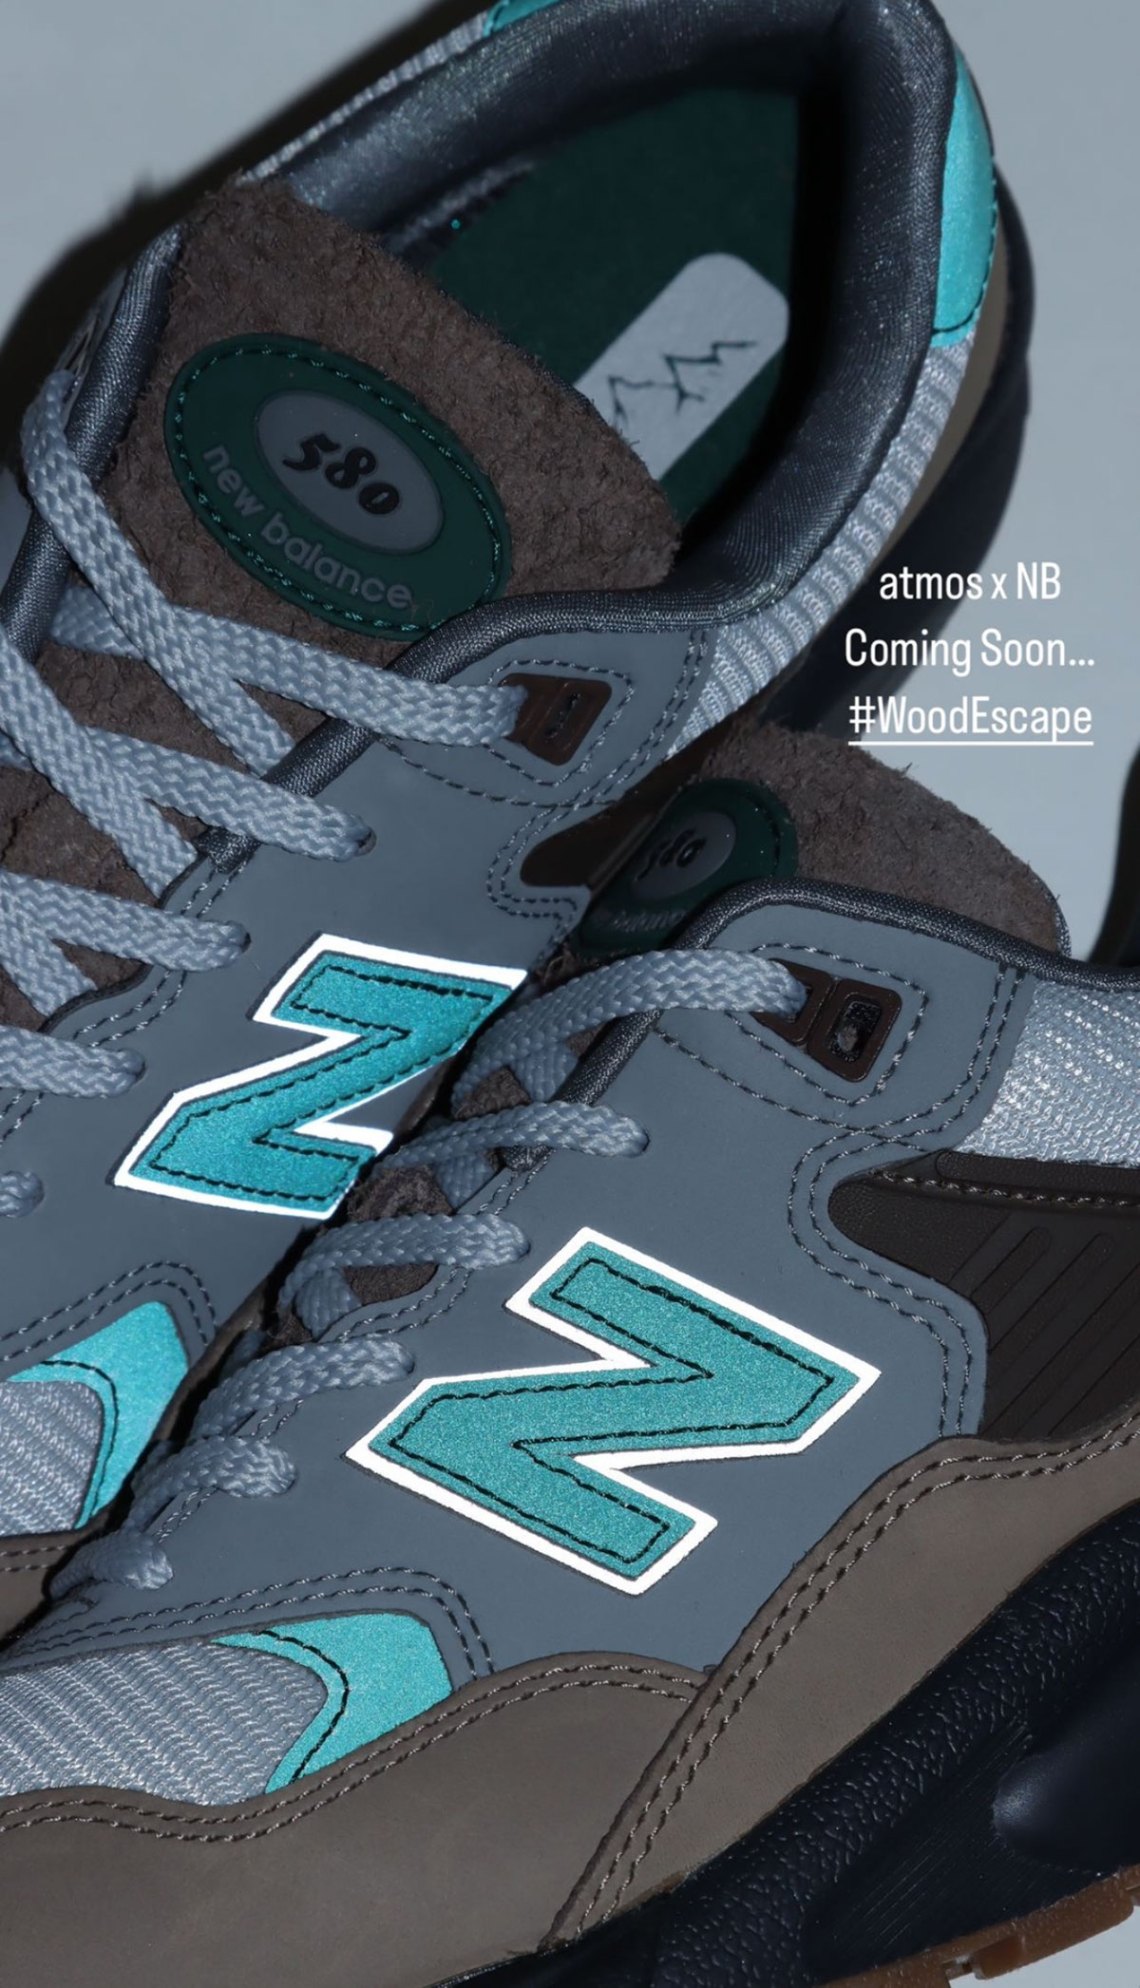 Atmos New Balance FuelCore Coast v4 Marathon Running Shoes Sneakers WCSTLLK4 Wood Escape Release Date 2